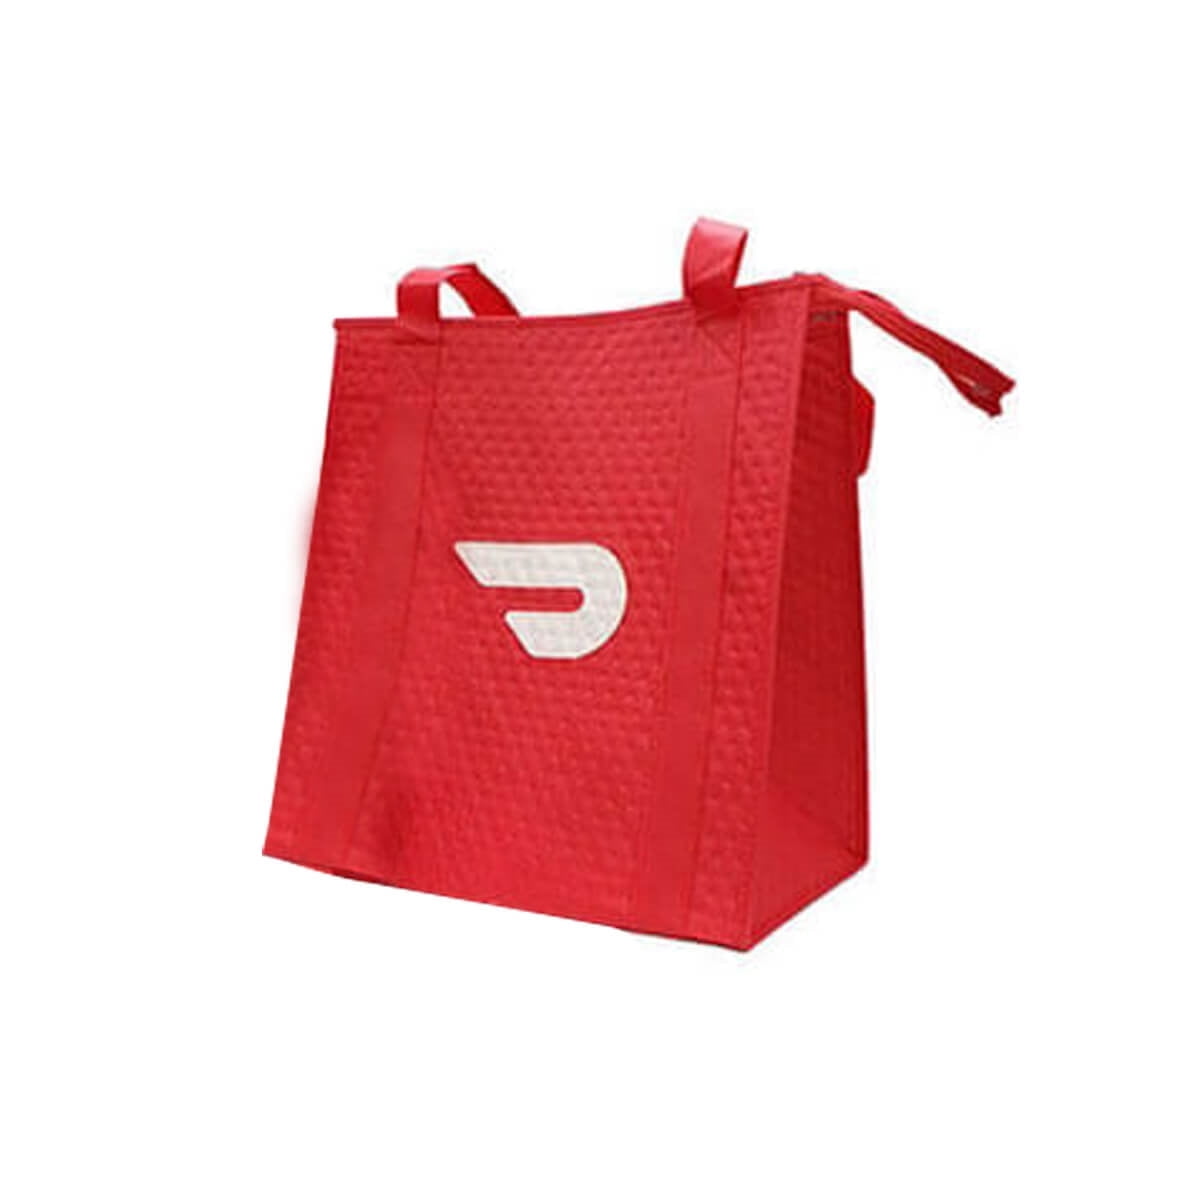 DoorDash Delivery Dasher Insulated Tote Bag 